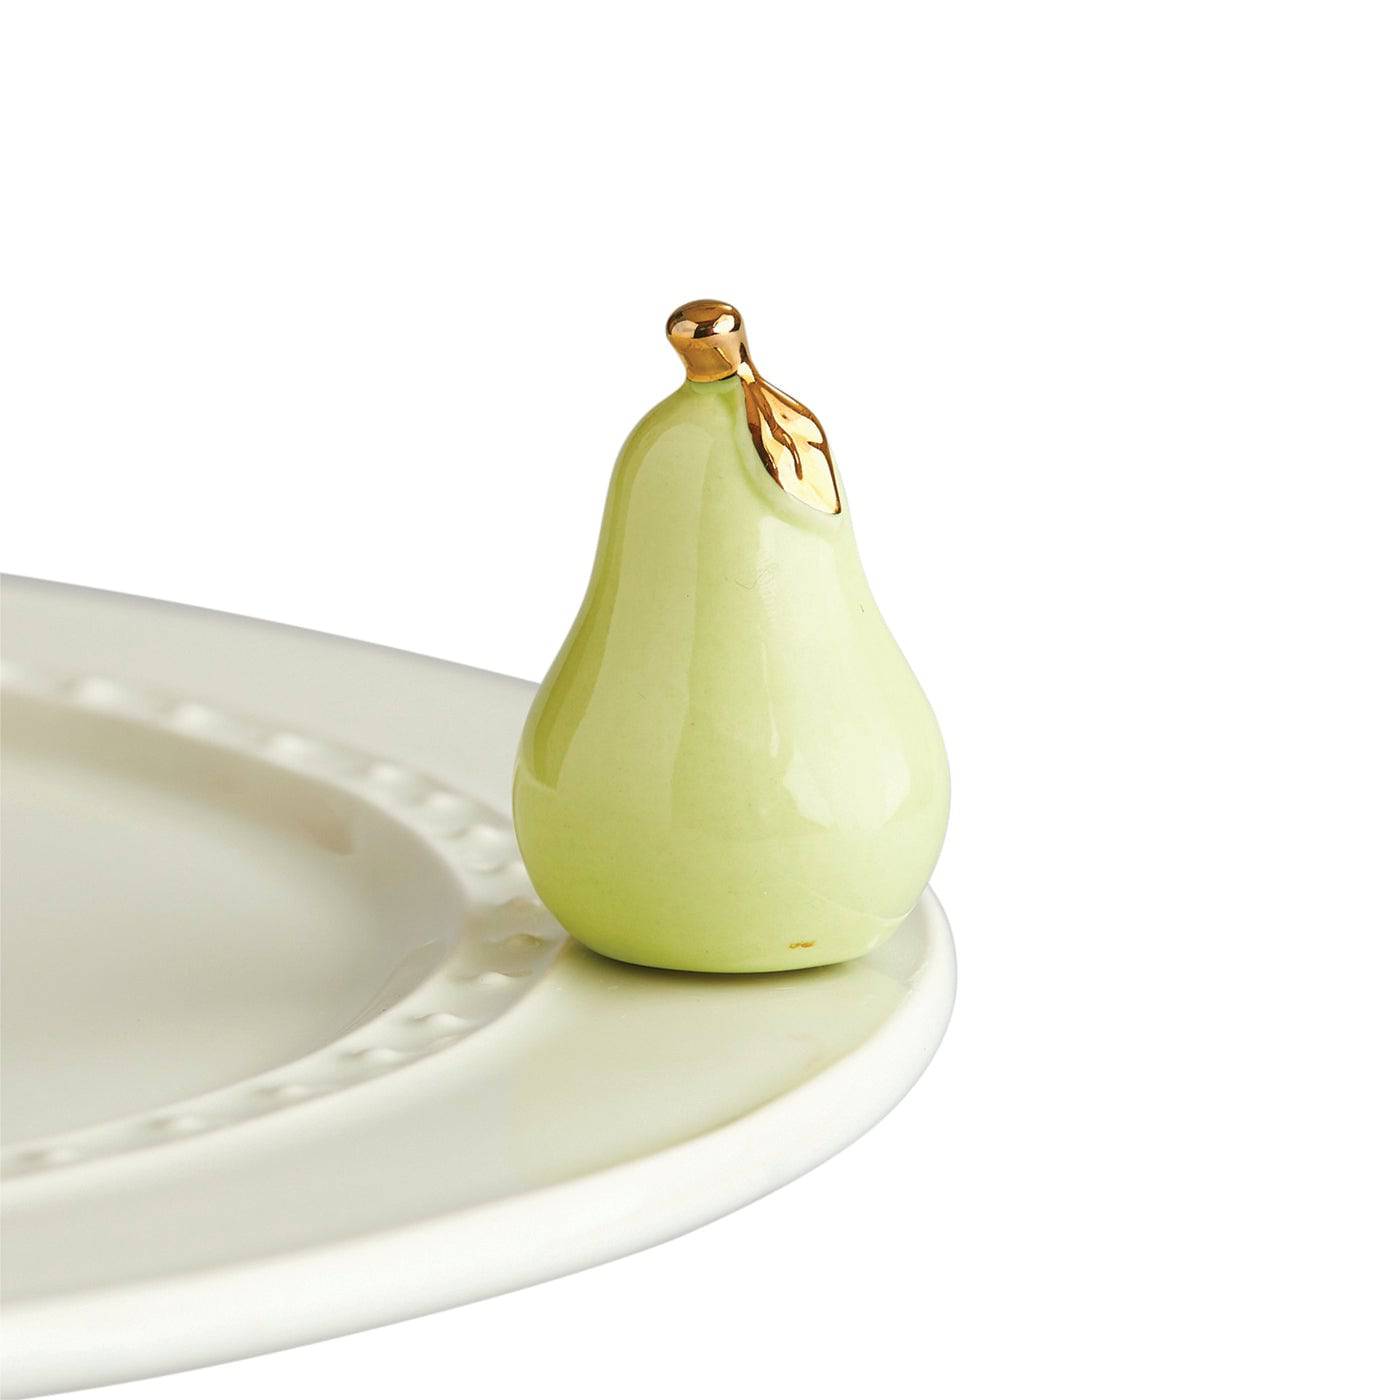 NORA FLEMING PEAR-FECTION! MINI A242 - Findlay Rowe Designs